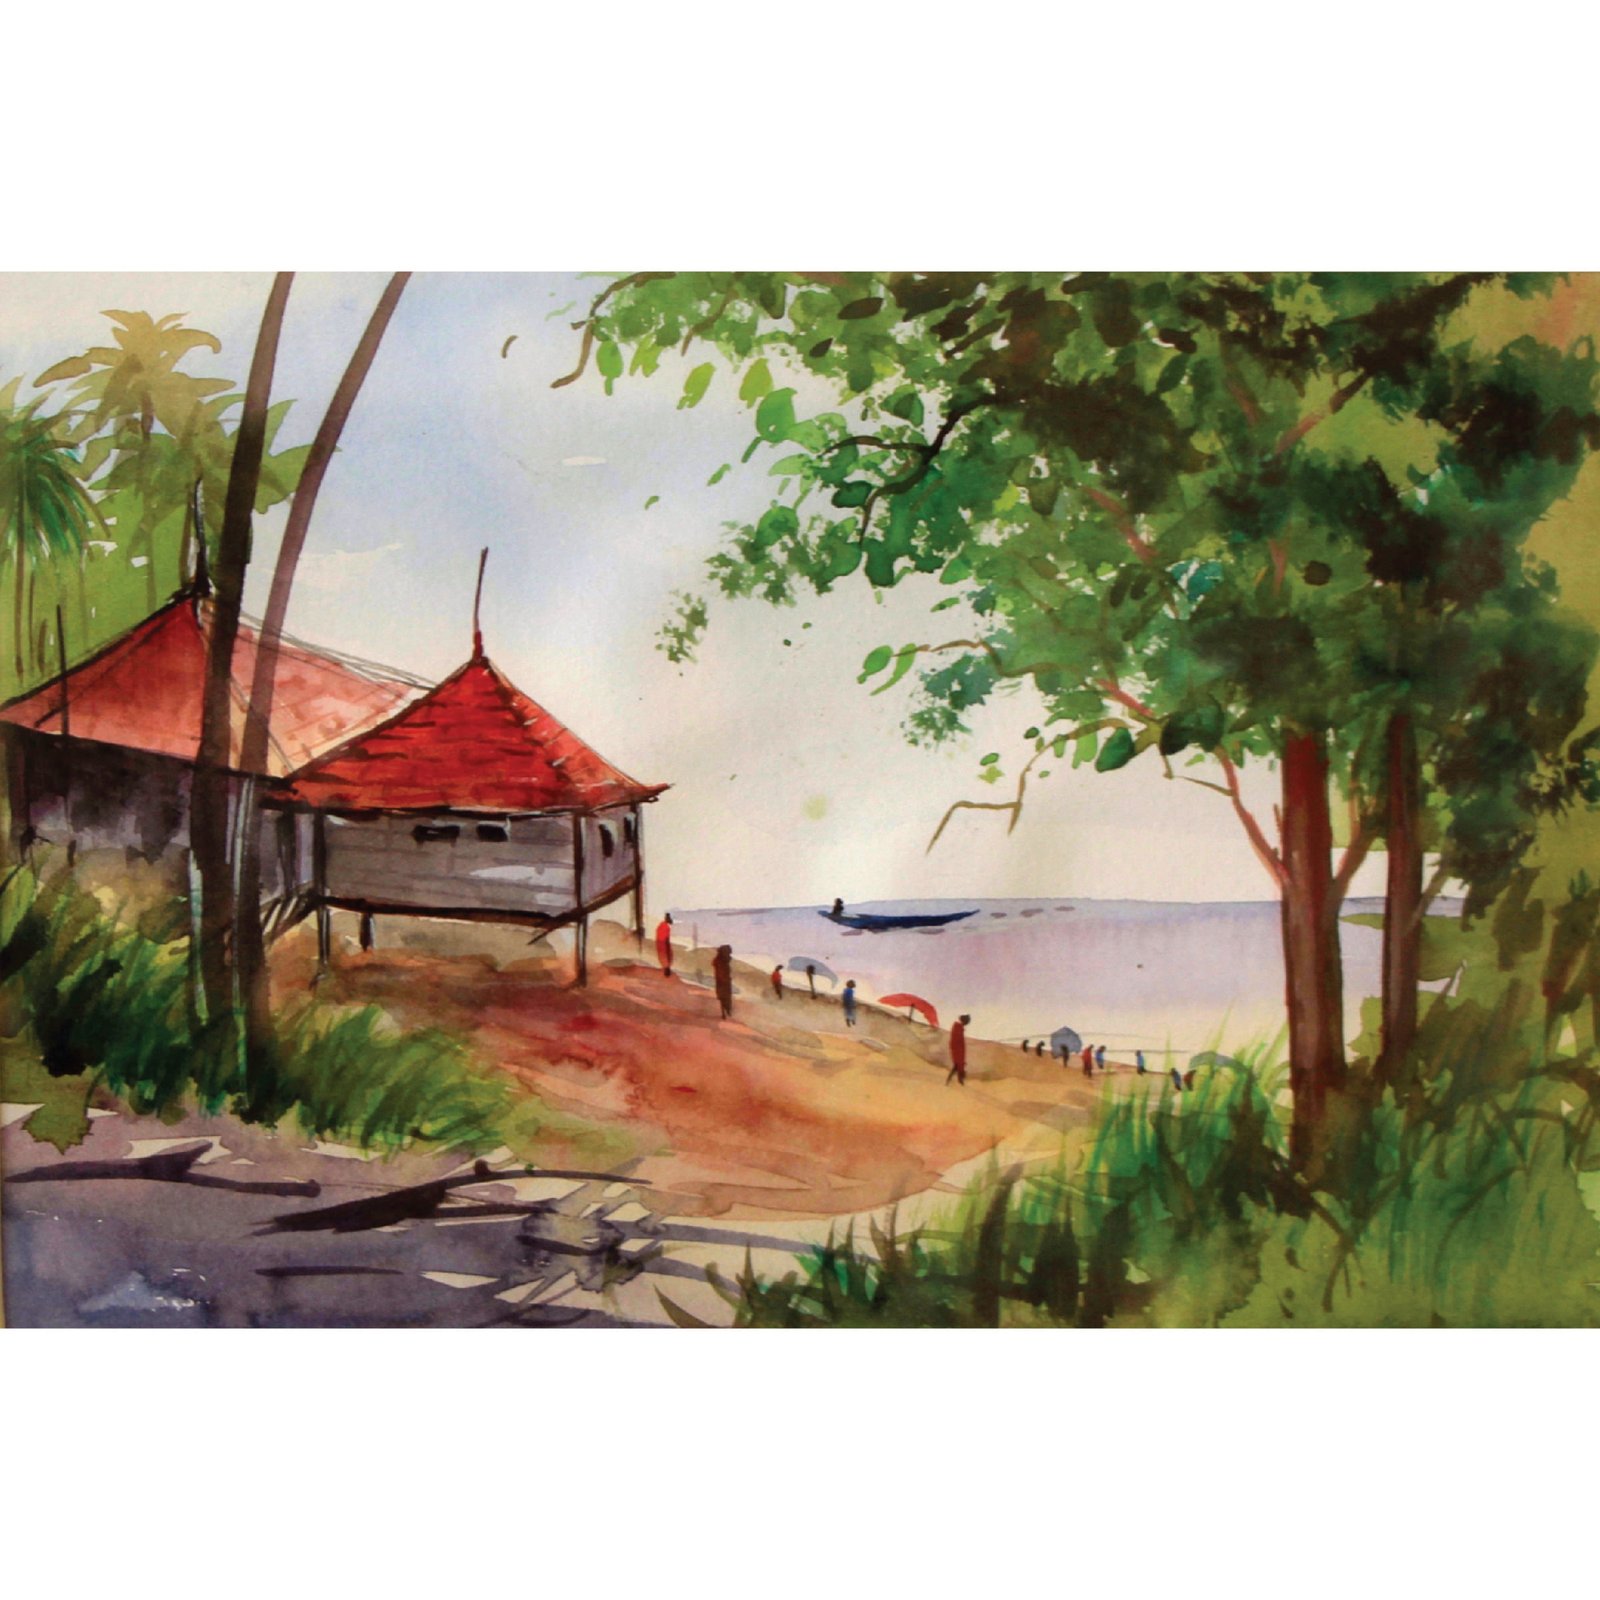 Watercolor Park On The Road Side With Beautiful Scenery Hand Drawn  Illustration